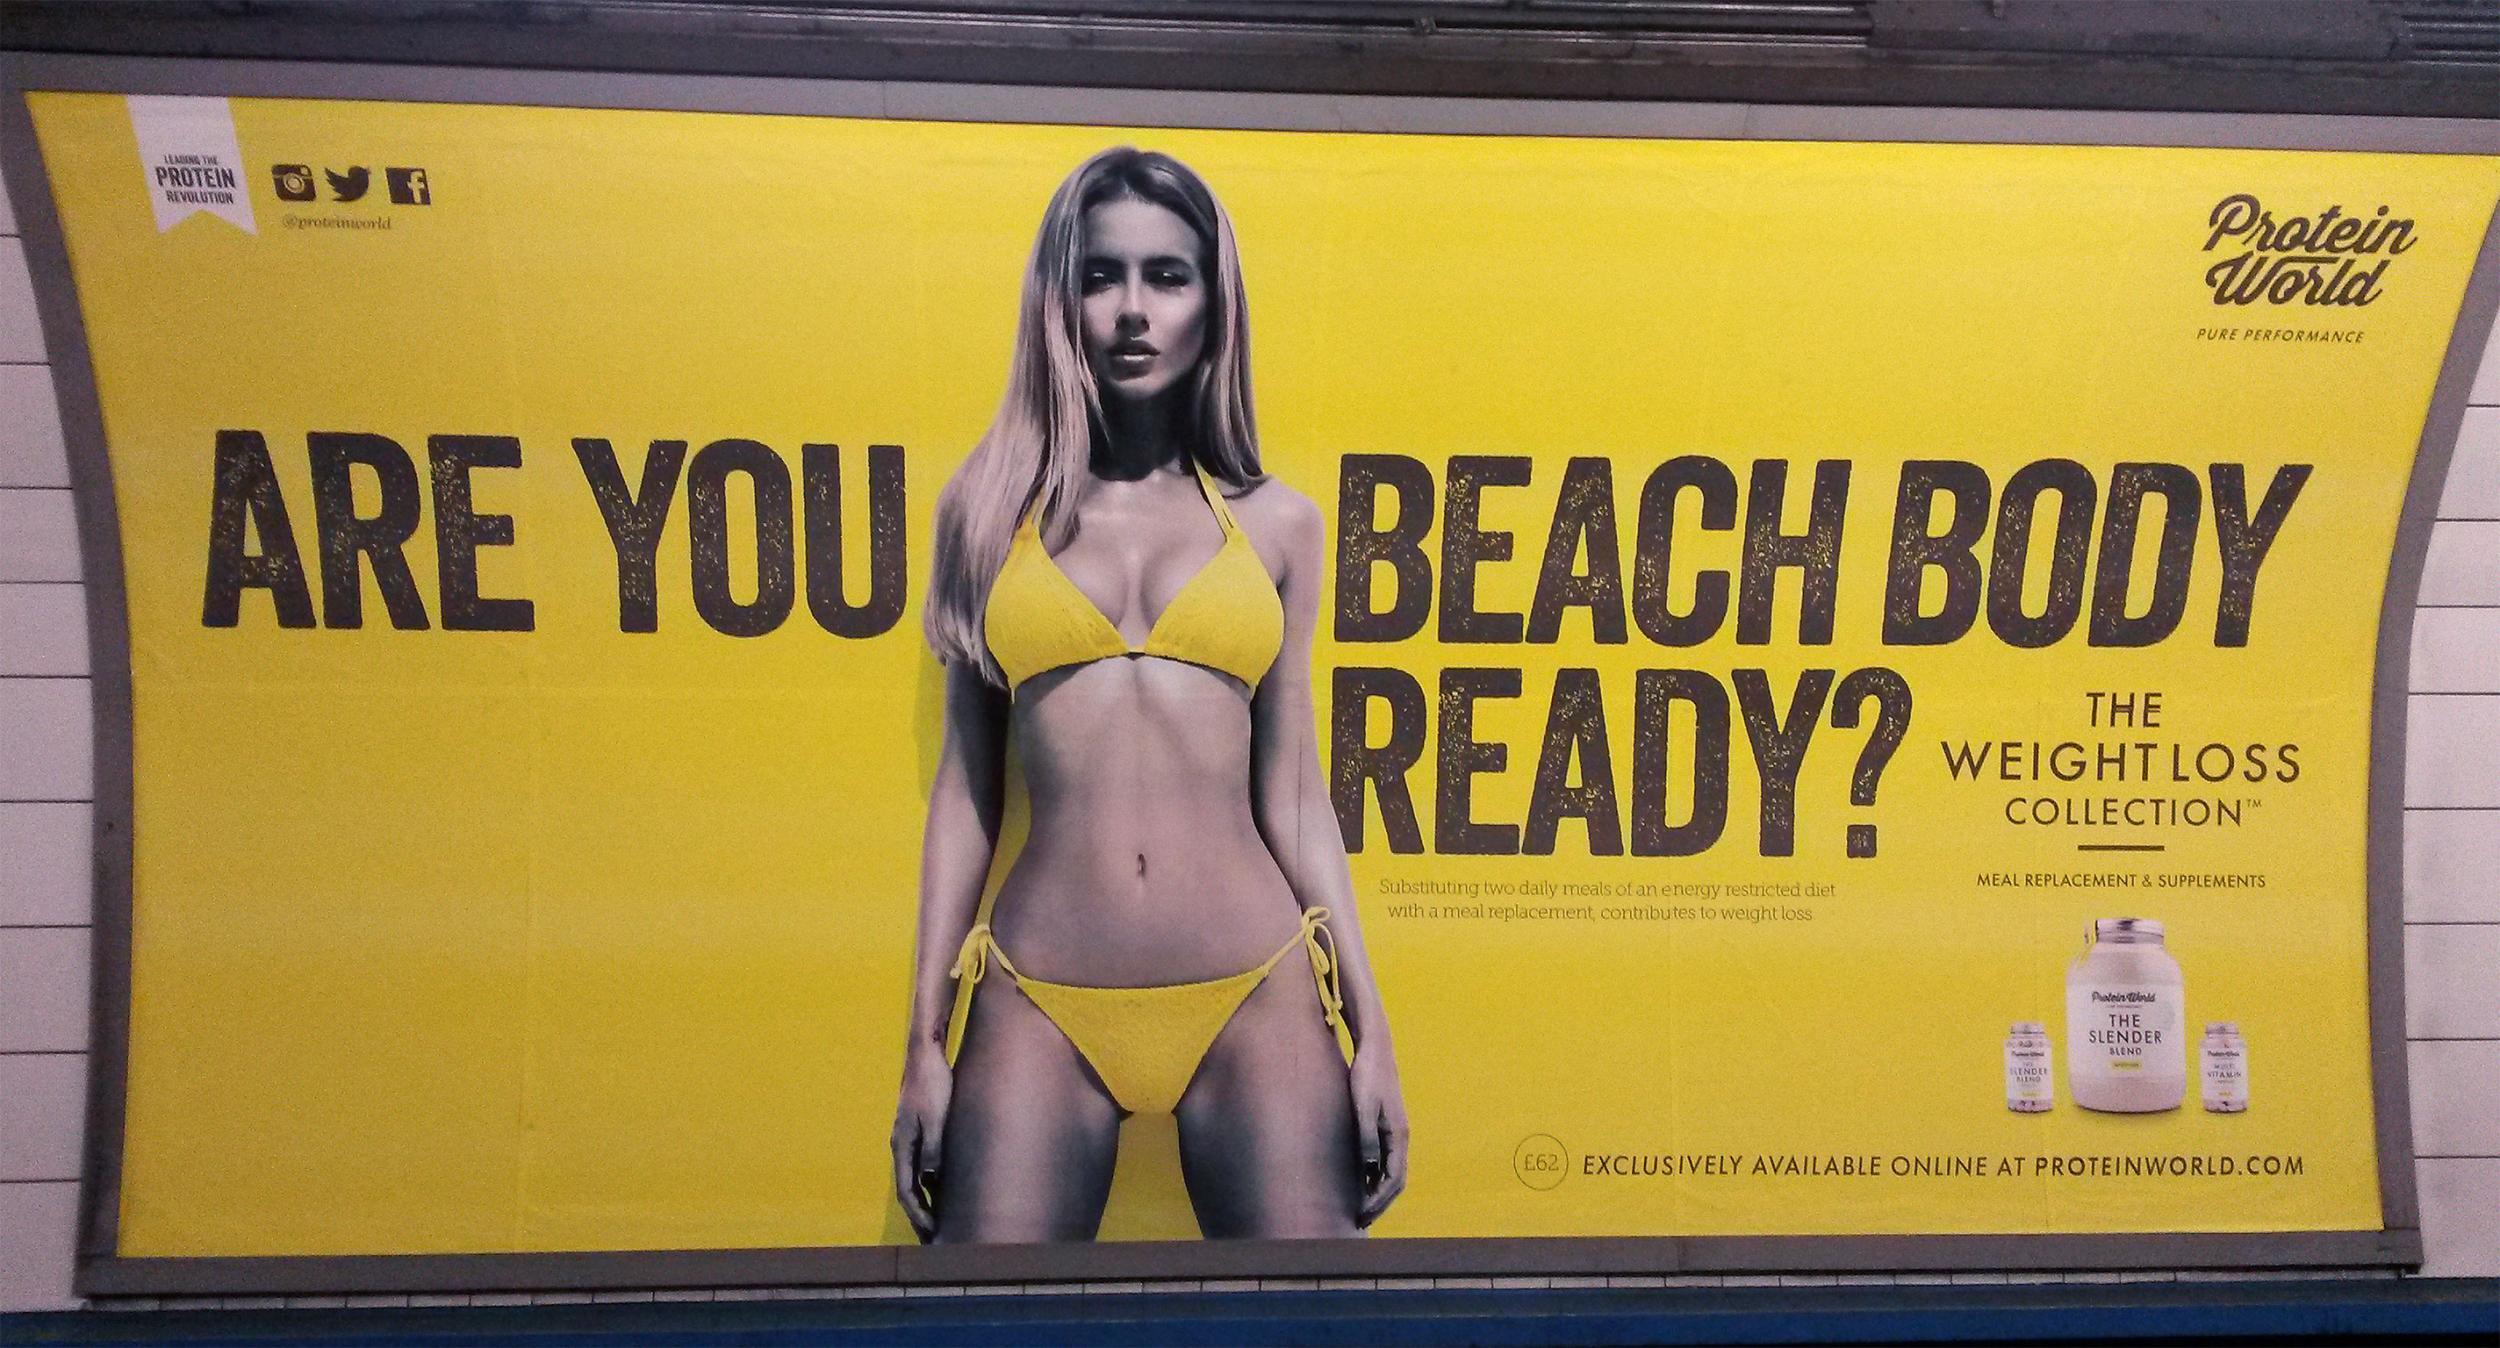 Adverts like this one for Protein World have sparked controversy in London - Sadiq Khan has proposed banning them